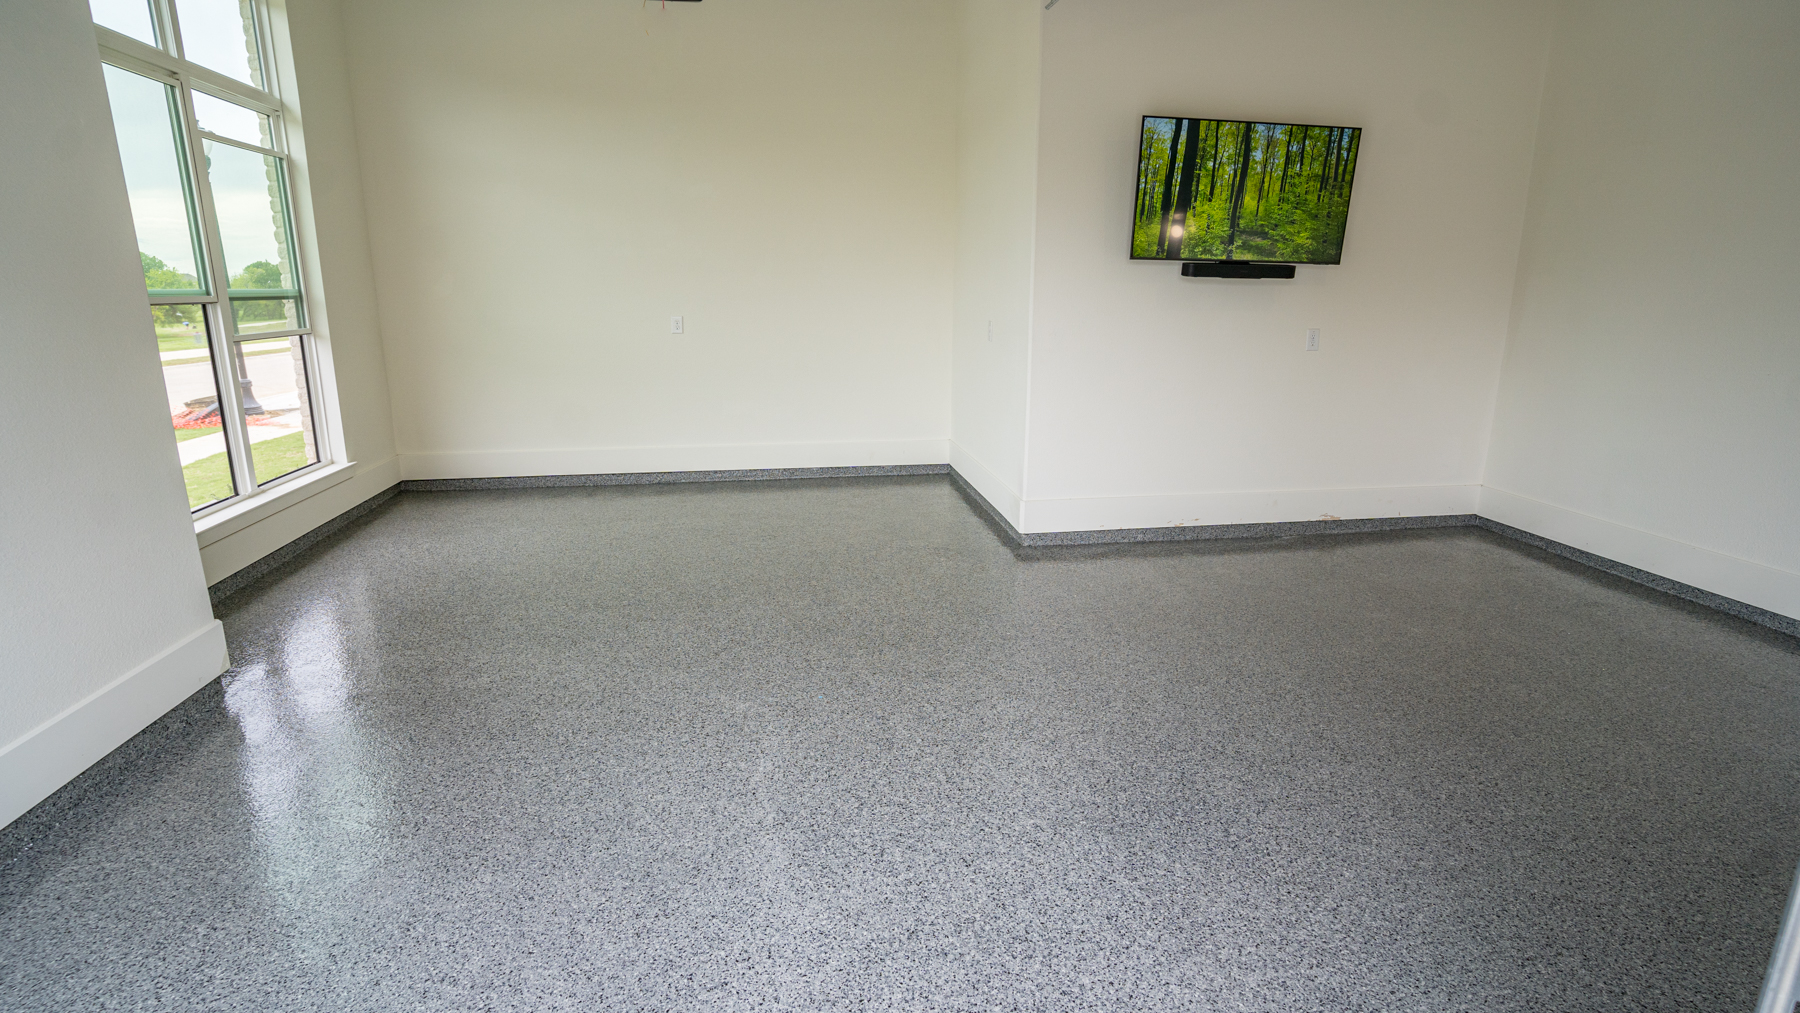 Polyaspatic coating floor installed in one day